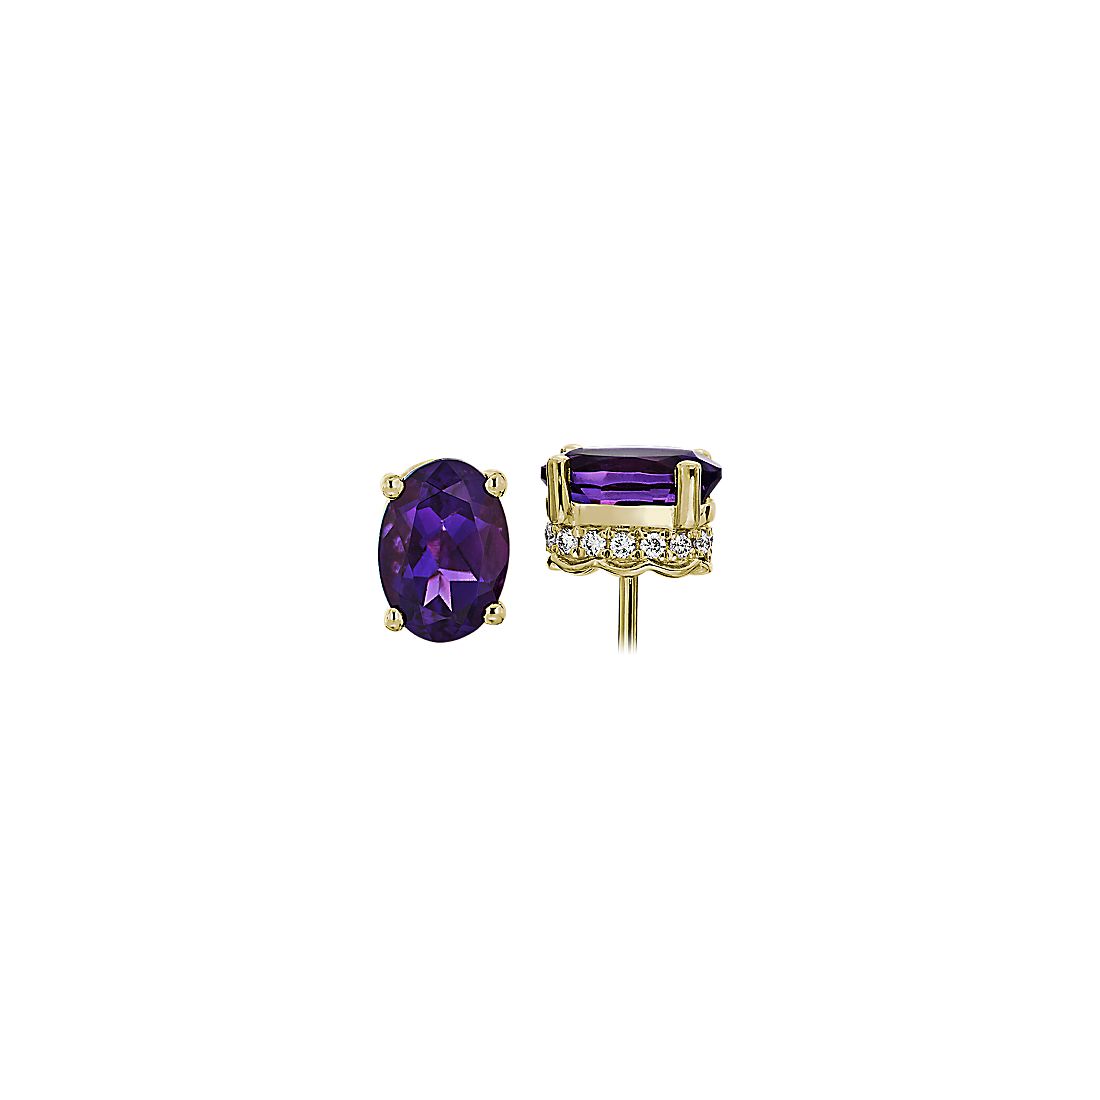 Oval Amethyst and Diamond Earrings in 14k Yellow Gold (7x5mm)